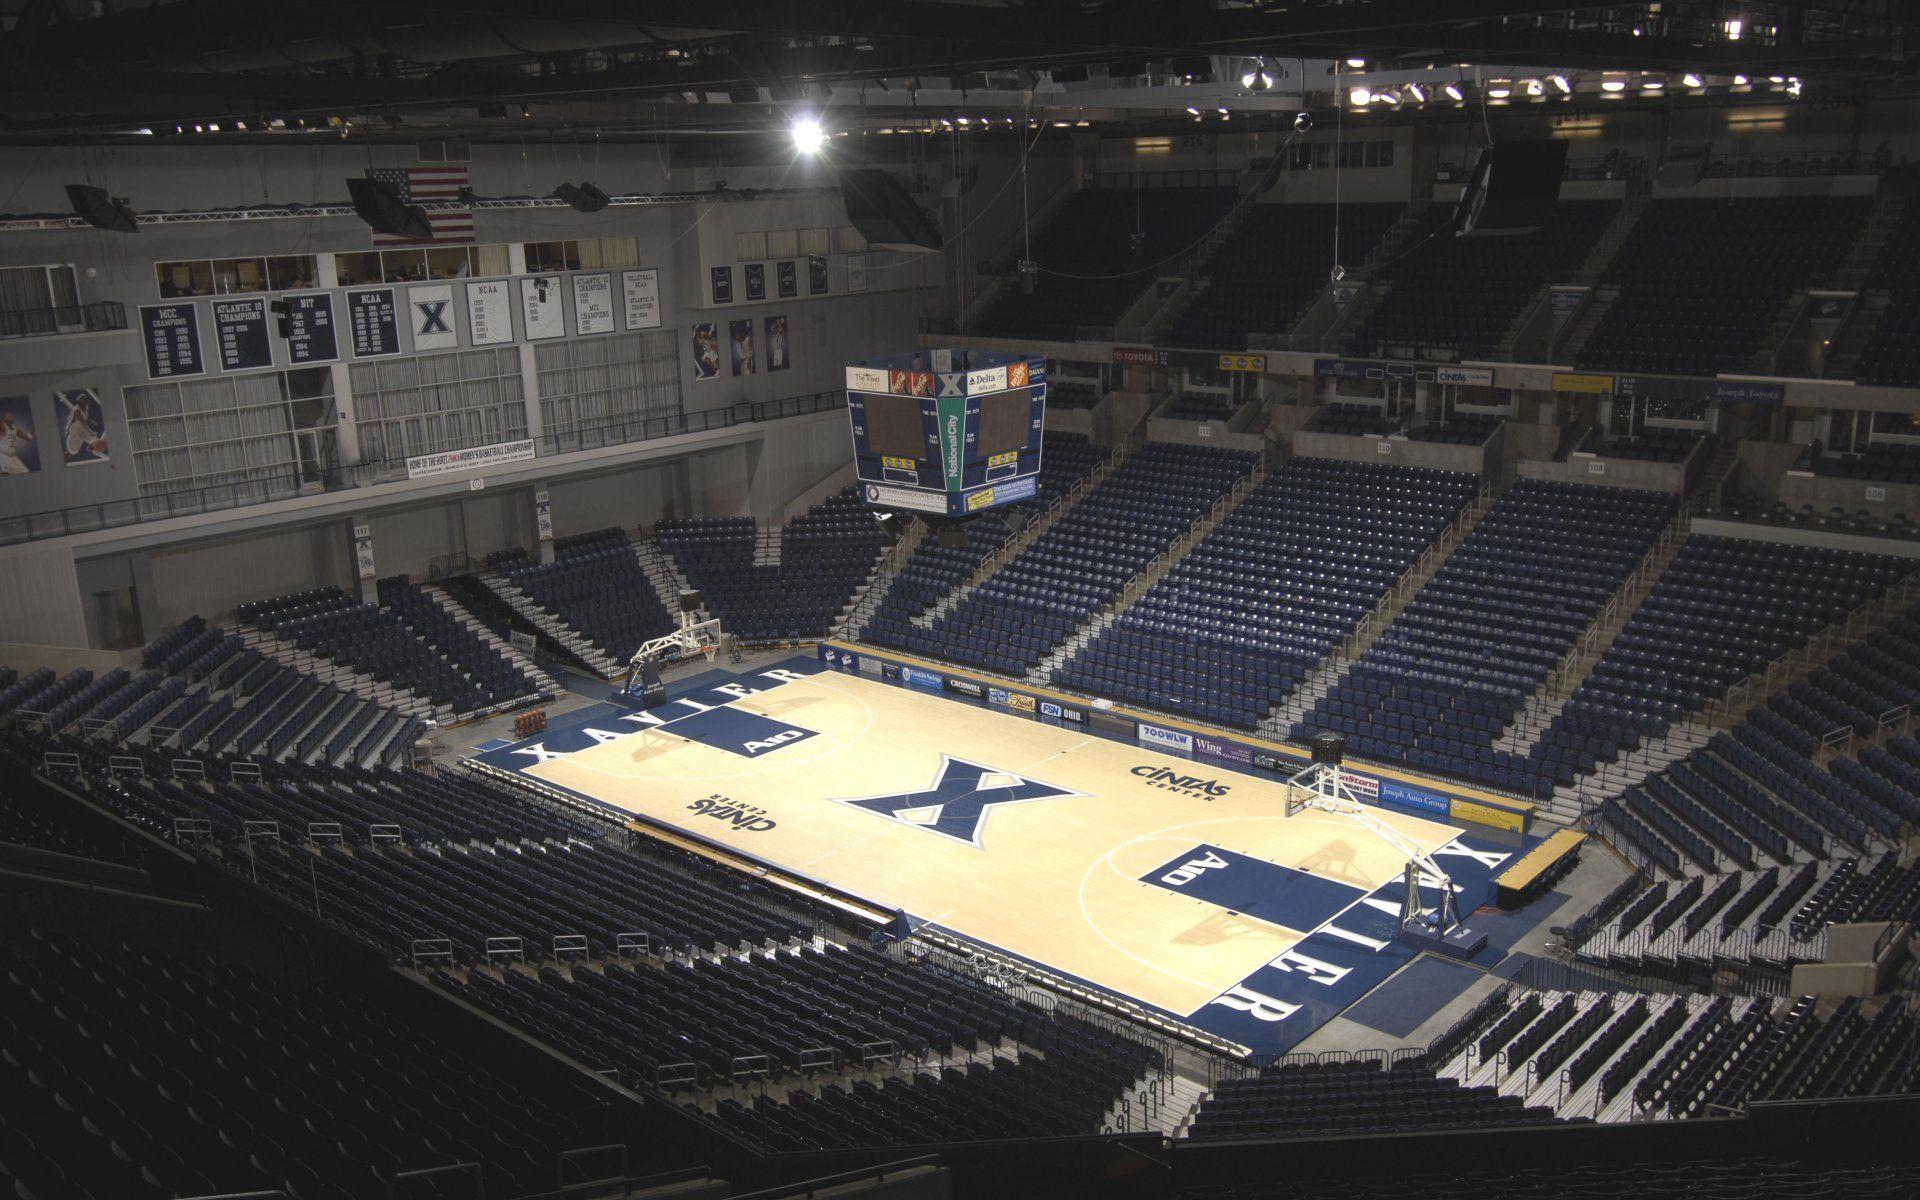 Big East Conference College Basketball Arena Wallpaper